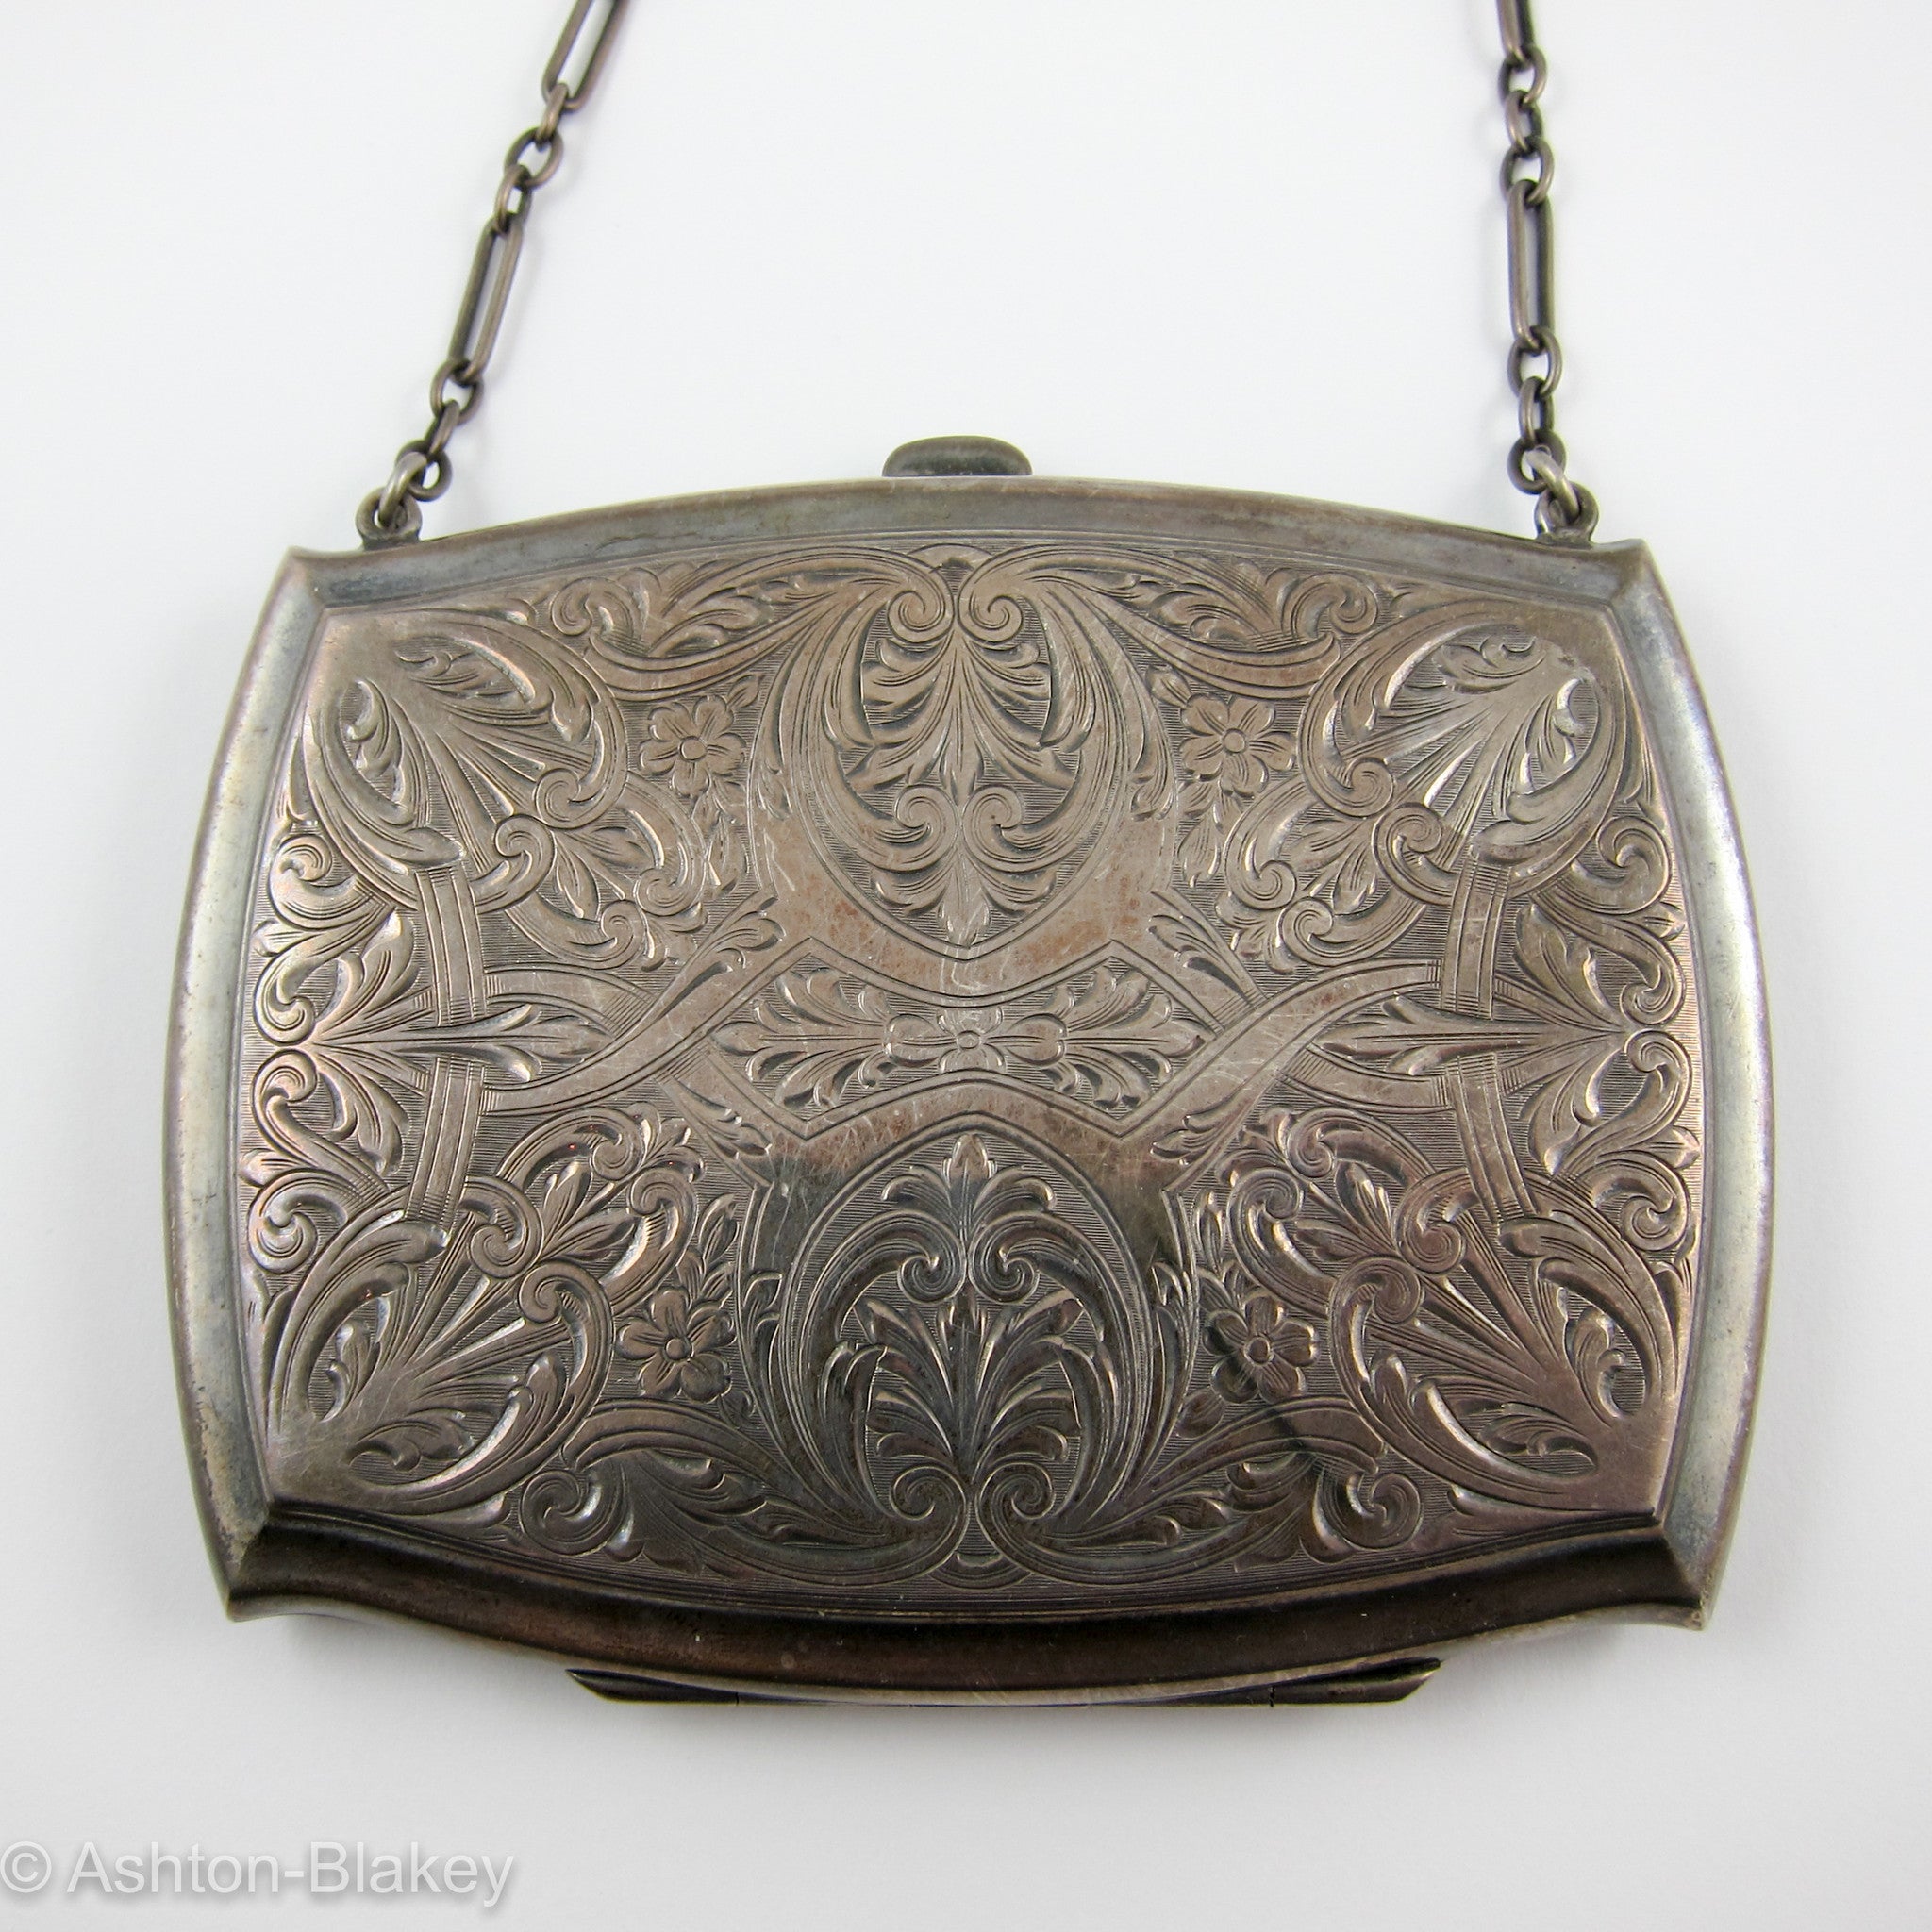 Antique English Sterling Silver Coin Purse - 1913 | 704023 |  Sellingantiques.co.uk